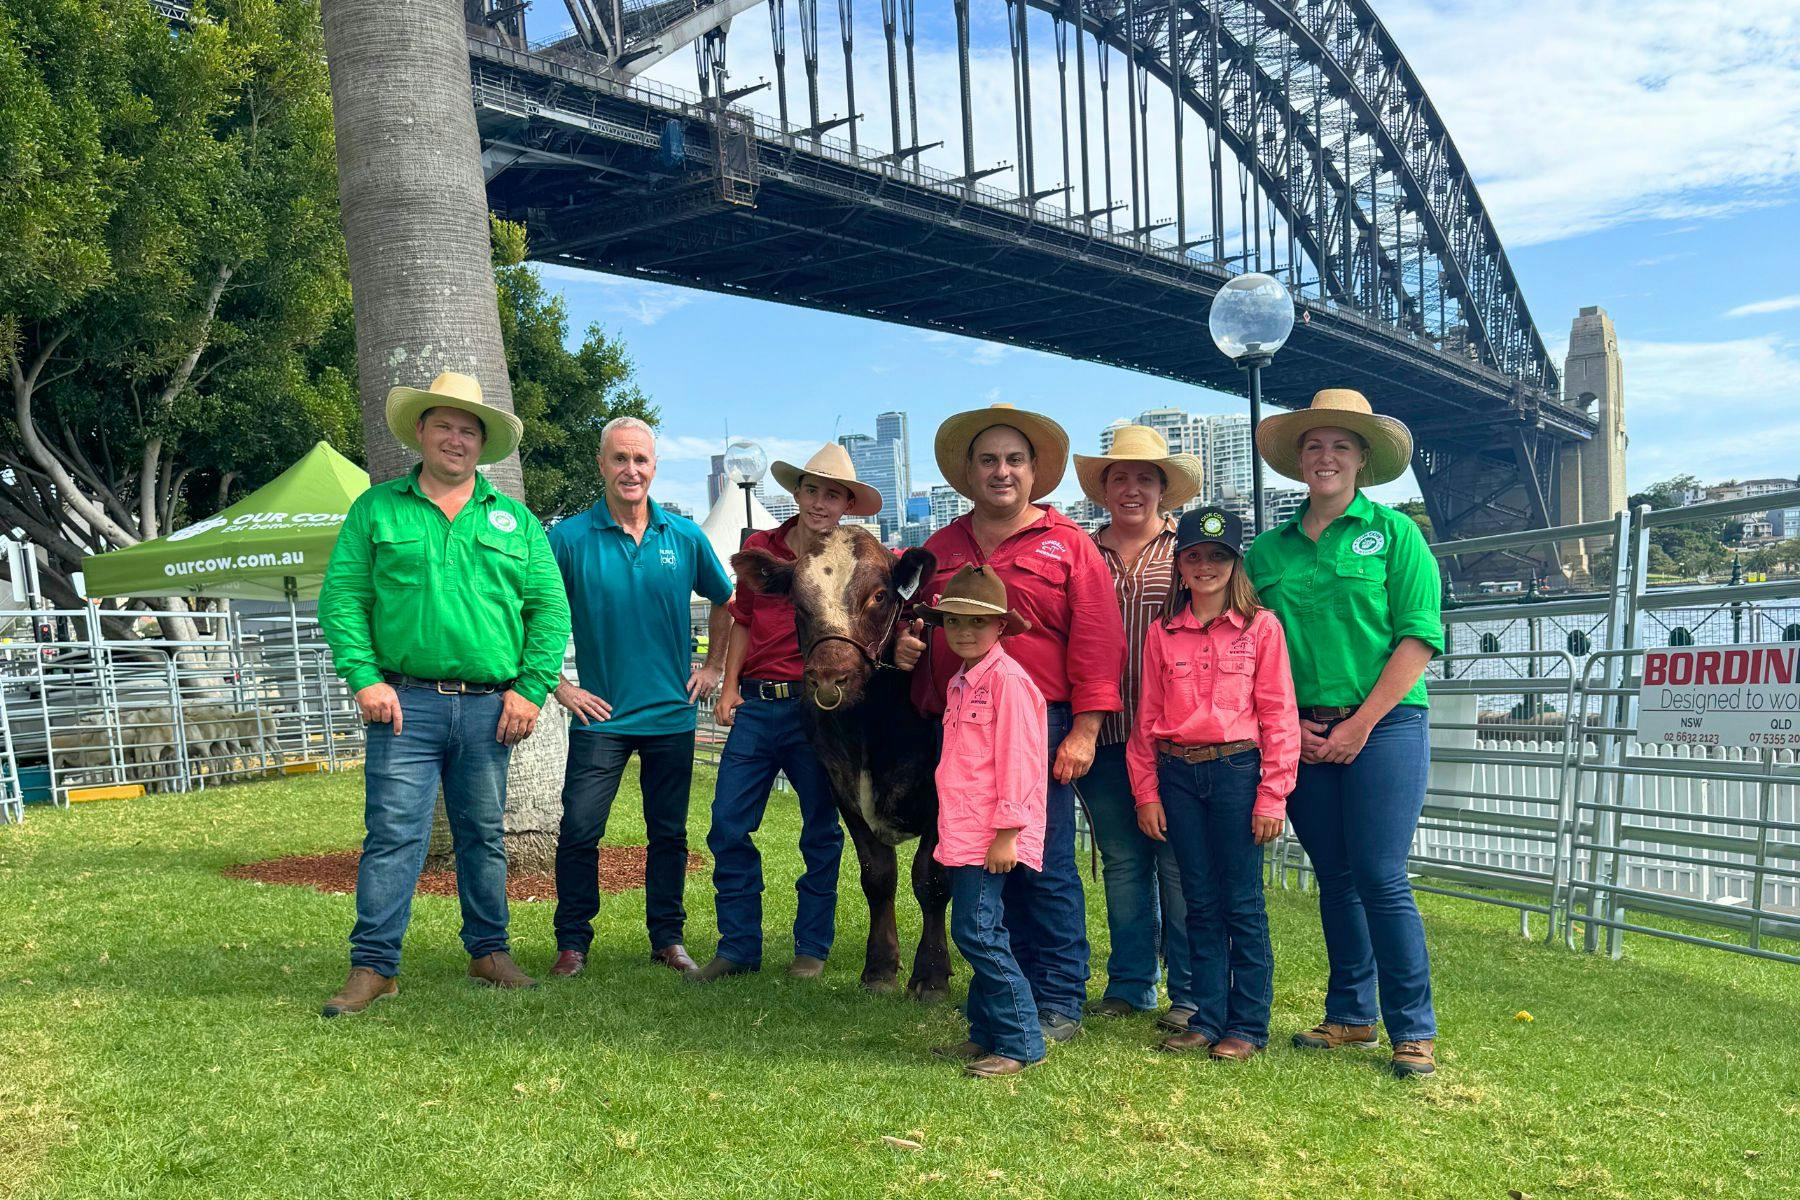 Our Cow takes on Sydney for ‘The Great Aussie BBQ’, in support of Rural Aid